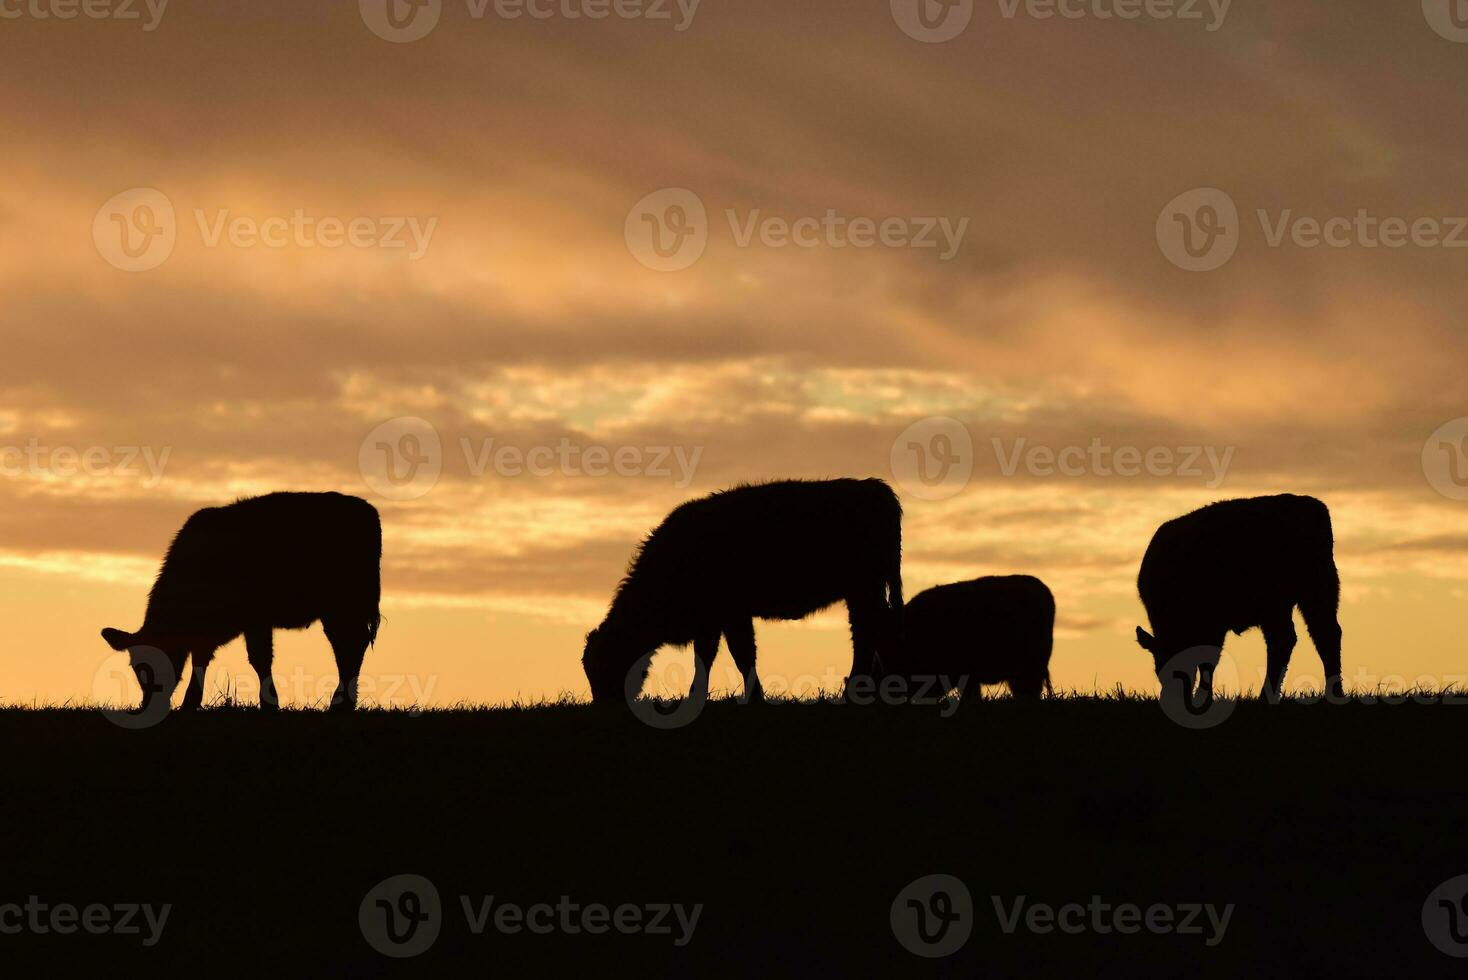 Steers fed with natural grass, Pampas, Argentina photo